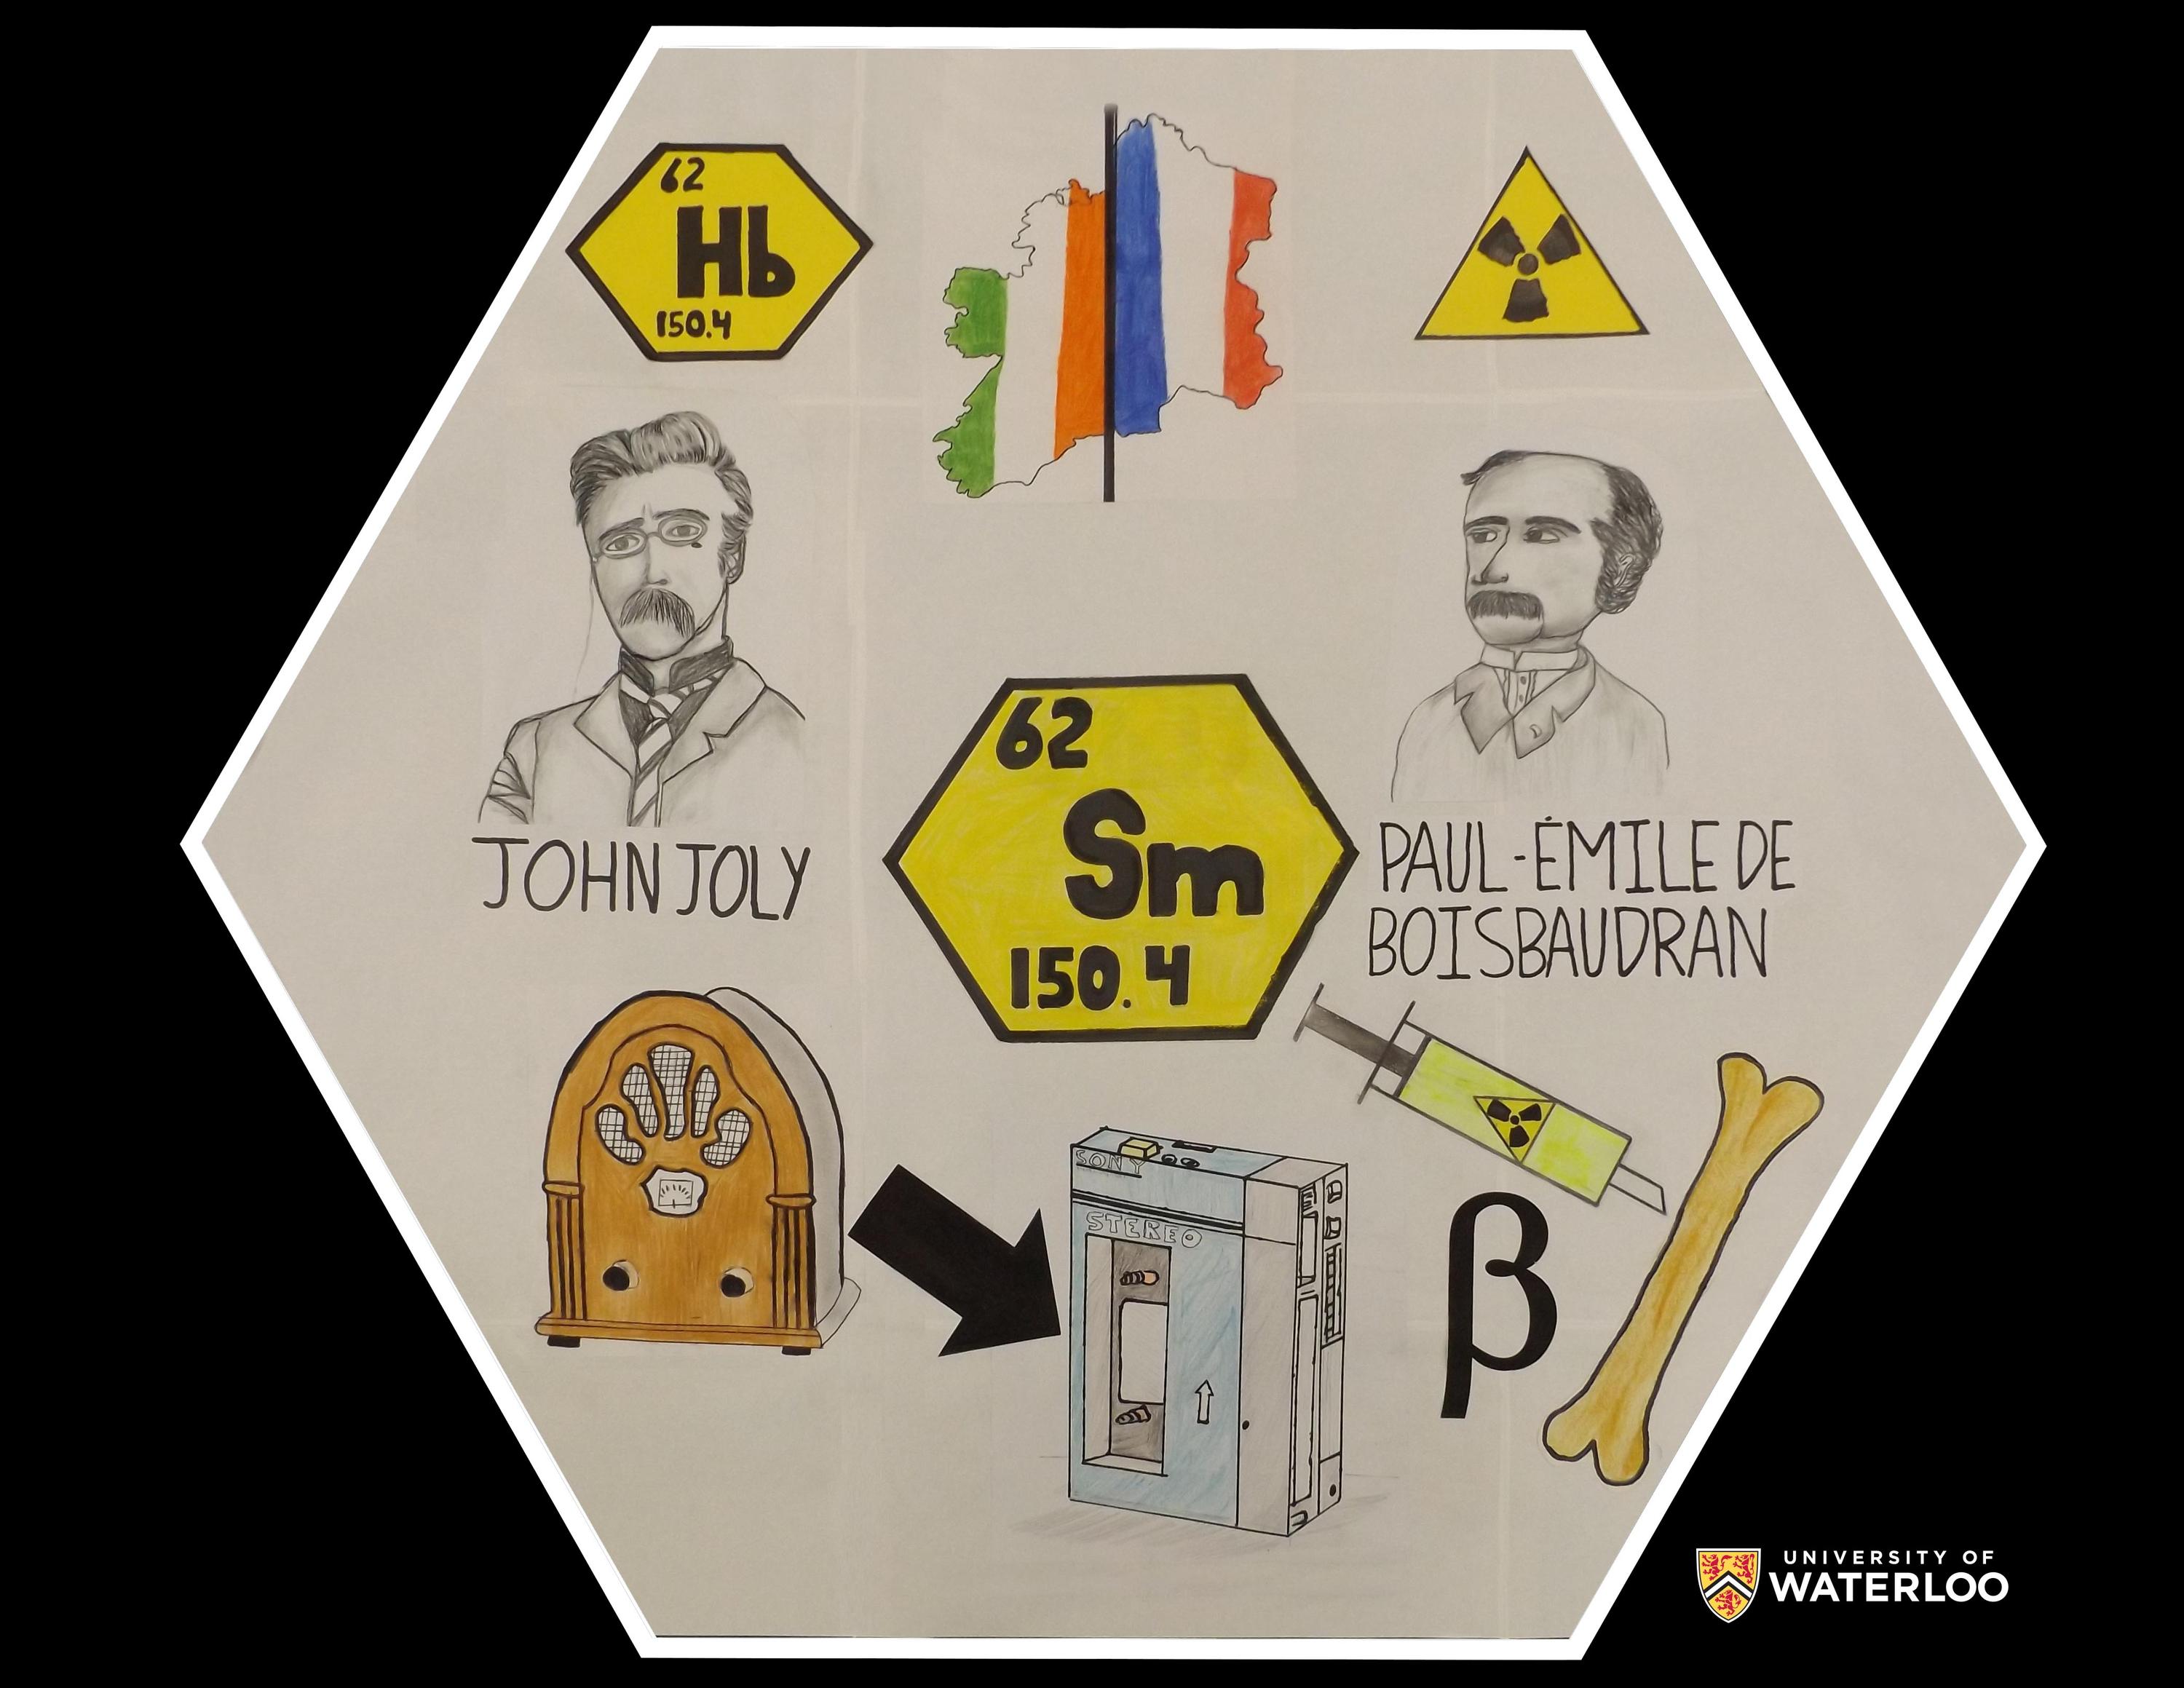 Pen and ink on white paper. Chemical symbol “Sm” sits in a central hexagon with “62” and “150.4”. Portraits of John Joly, left, and Paul-Émile de Boisbaudran, right. Above them are the Irish and French flags along with an allusion to the previous name for this element Hibernium, Hb, and a radioactive hazard symbol. Below is a transistor radio, handheld tape recorder, along with a syringe injecting radiotherapy drugs into a bone and the Greek symbol β.